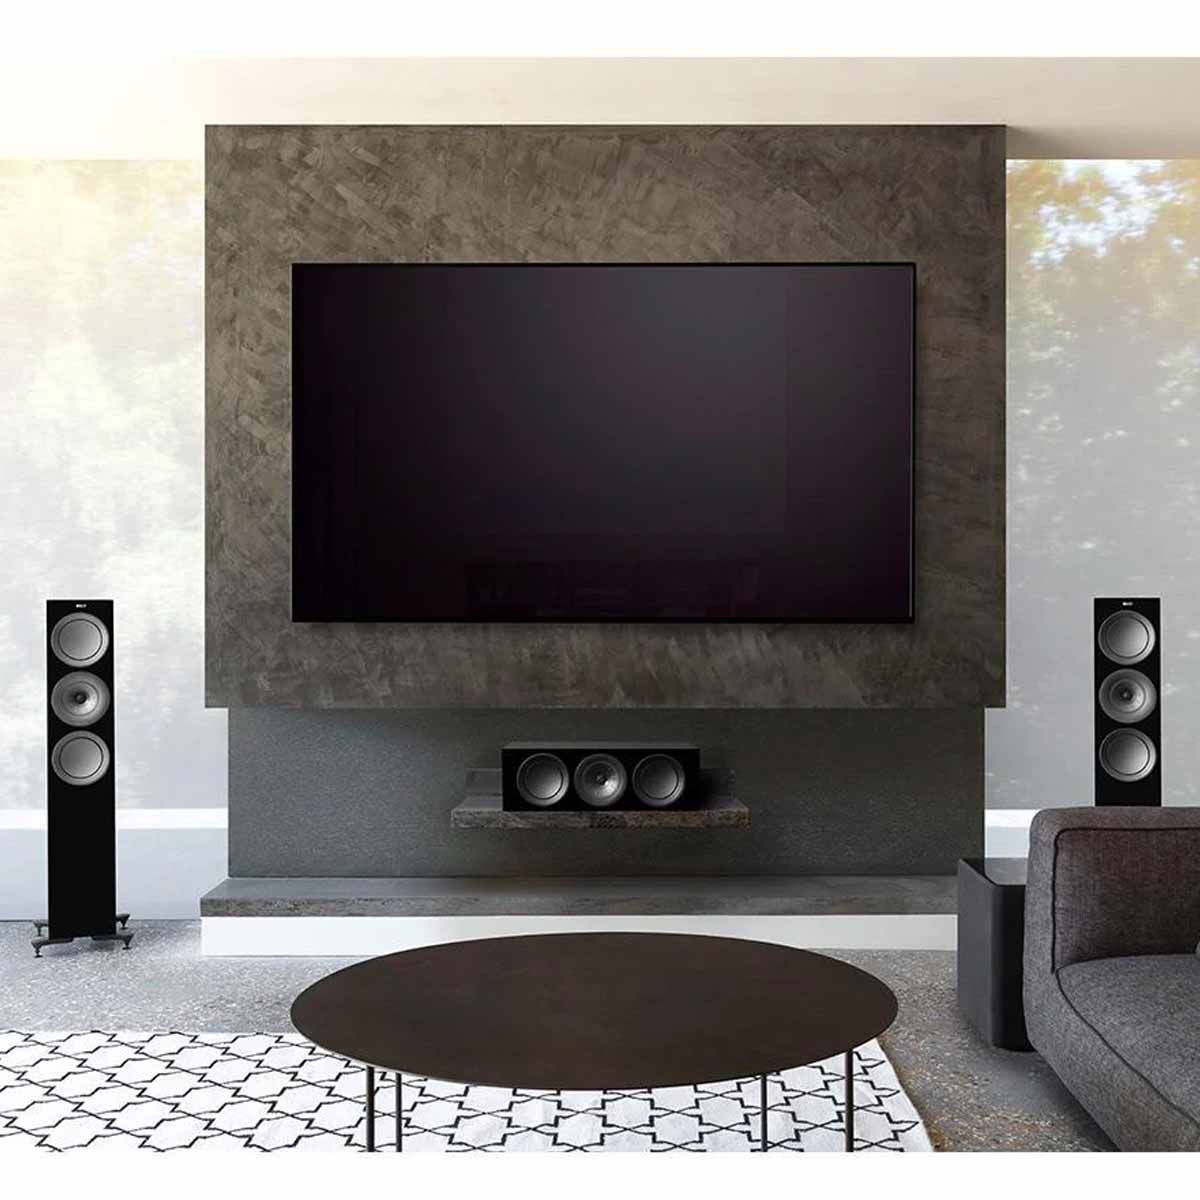 KEF R Series front stage with TV mounted on stone wall